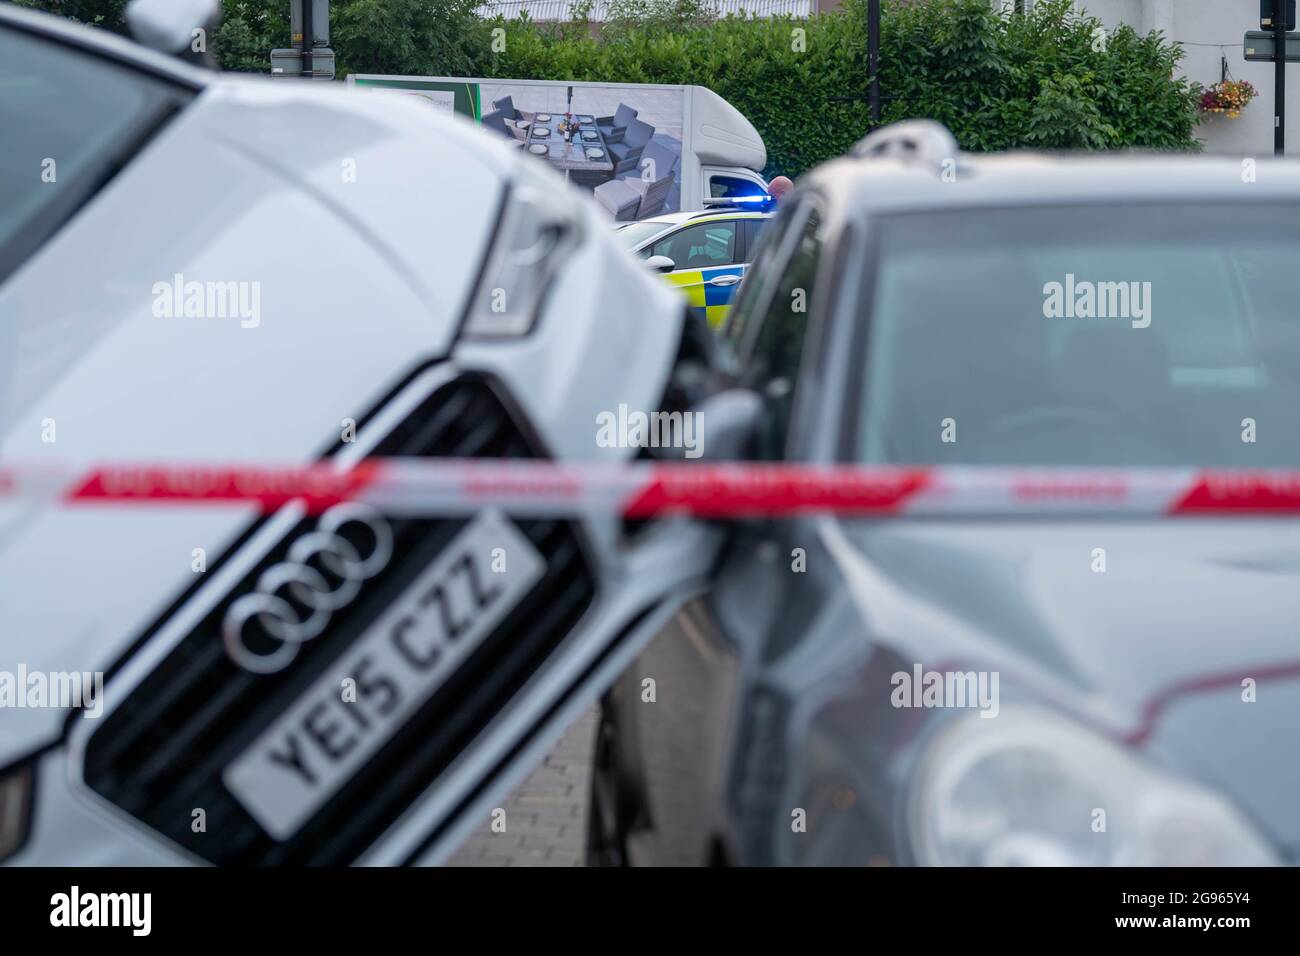 Brentwood Essex 24th July 2021 Road Traffic accident, Hart Street, Brentwood Essex,  A woman, Emma Turner 21, has been arrested and charged with drunk driving Credit: Ian Davidson/Alamy Live News Stock Photo